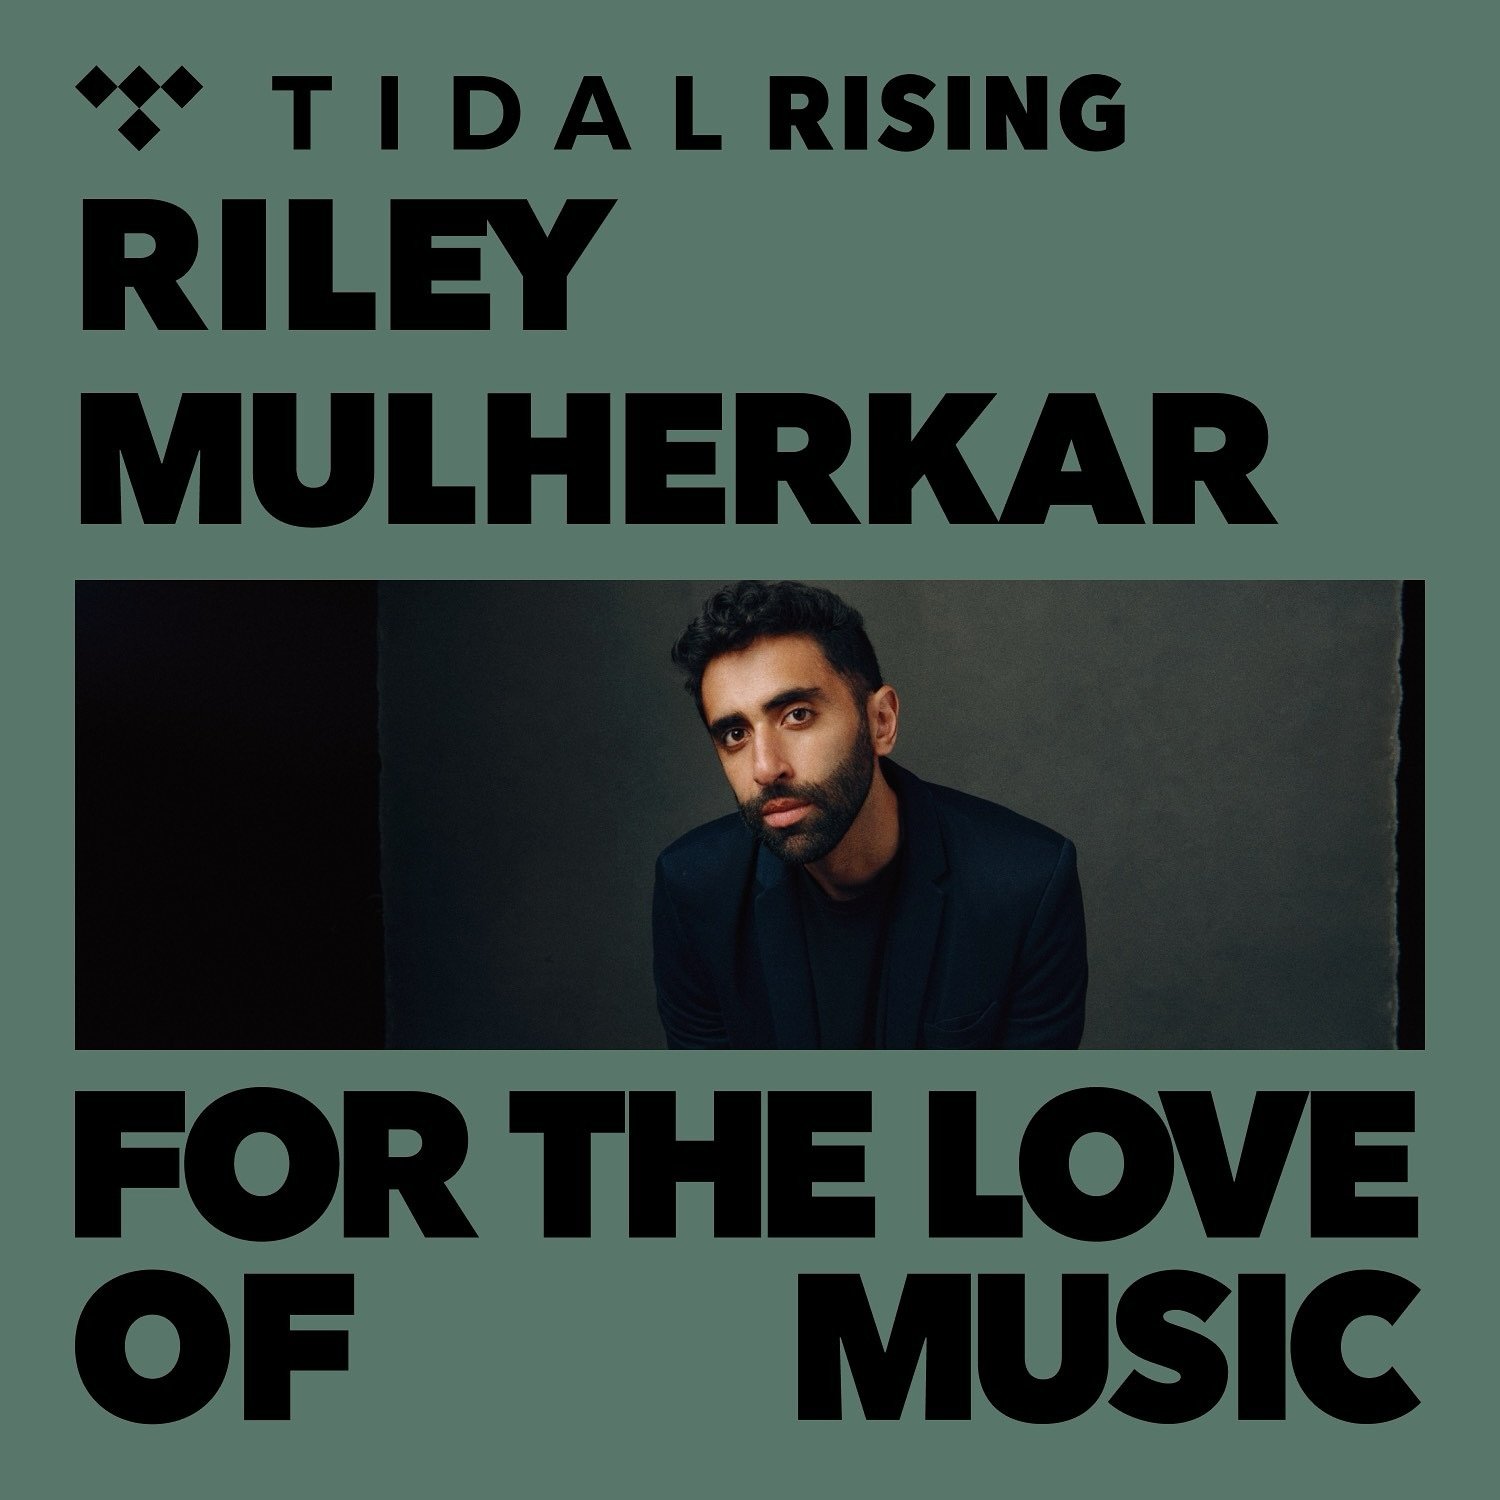 Excited to be joining the @TIDAL RISING program. Join me on the journey and discover other talented artists.
#TIDALRISING #Partner

🙏🏽🎺

📷: @zenithrichards